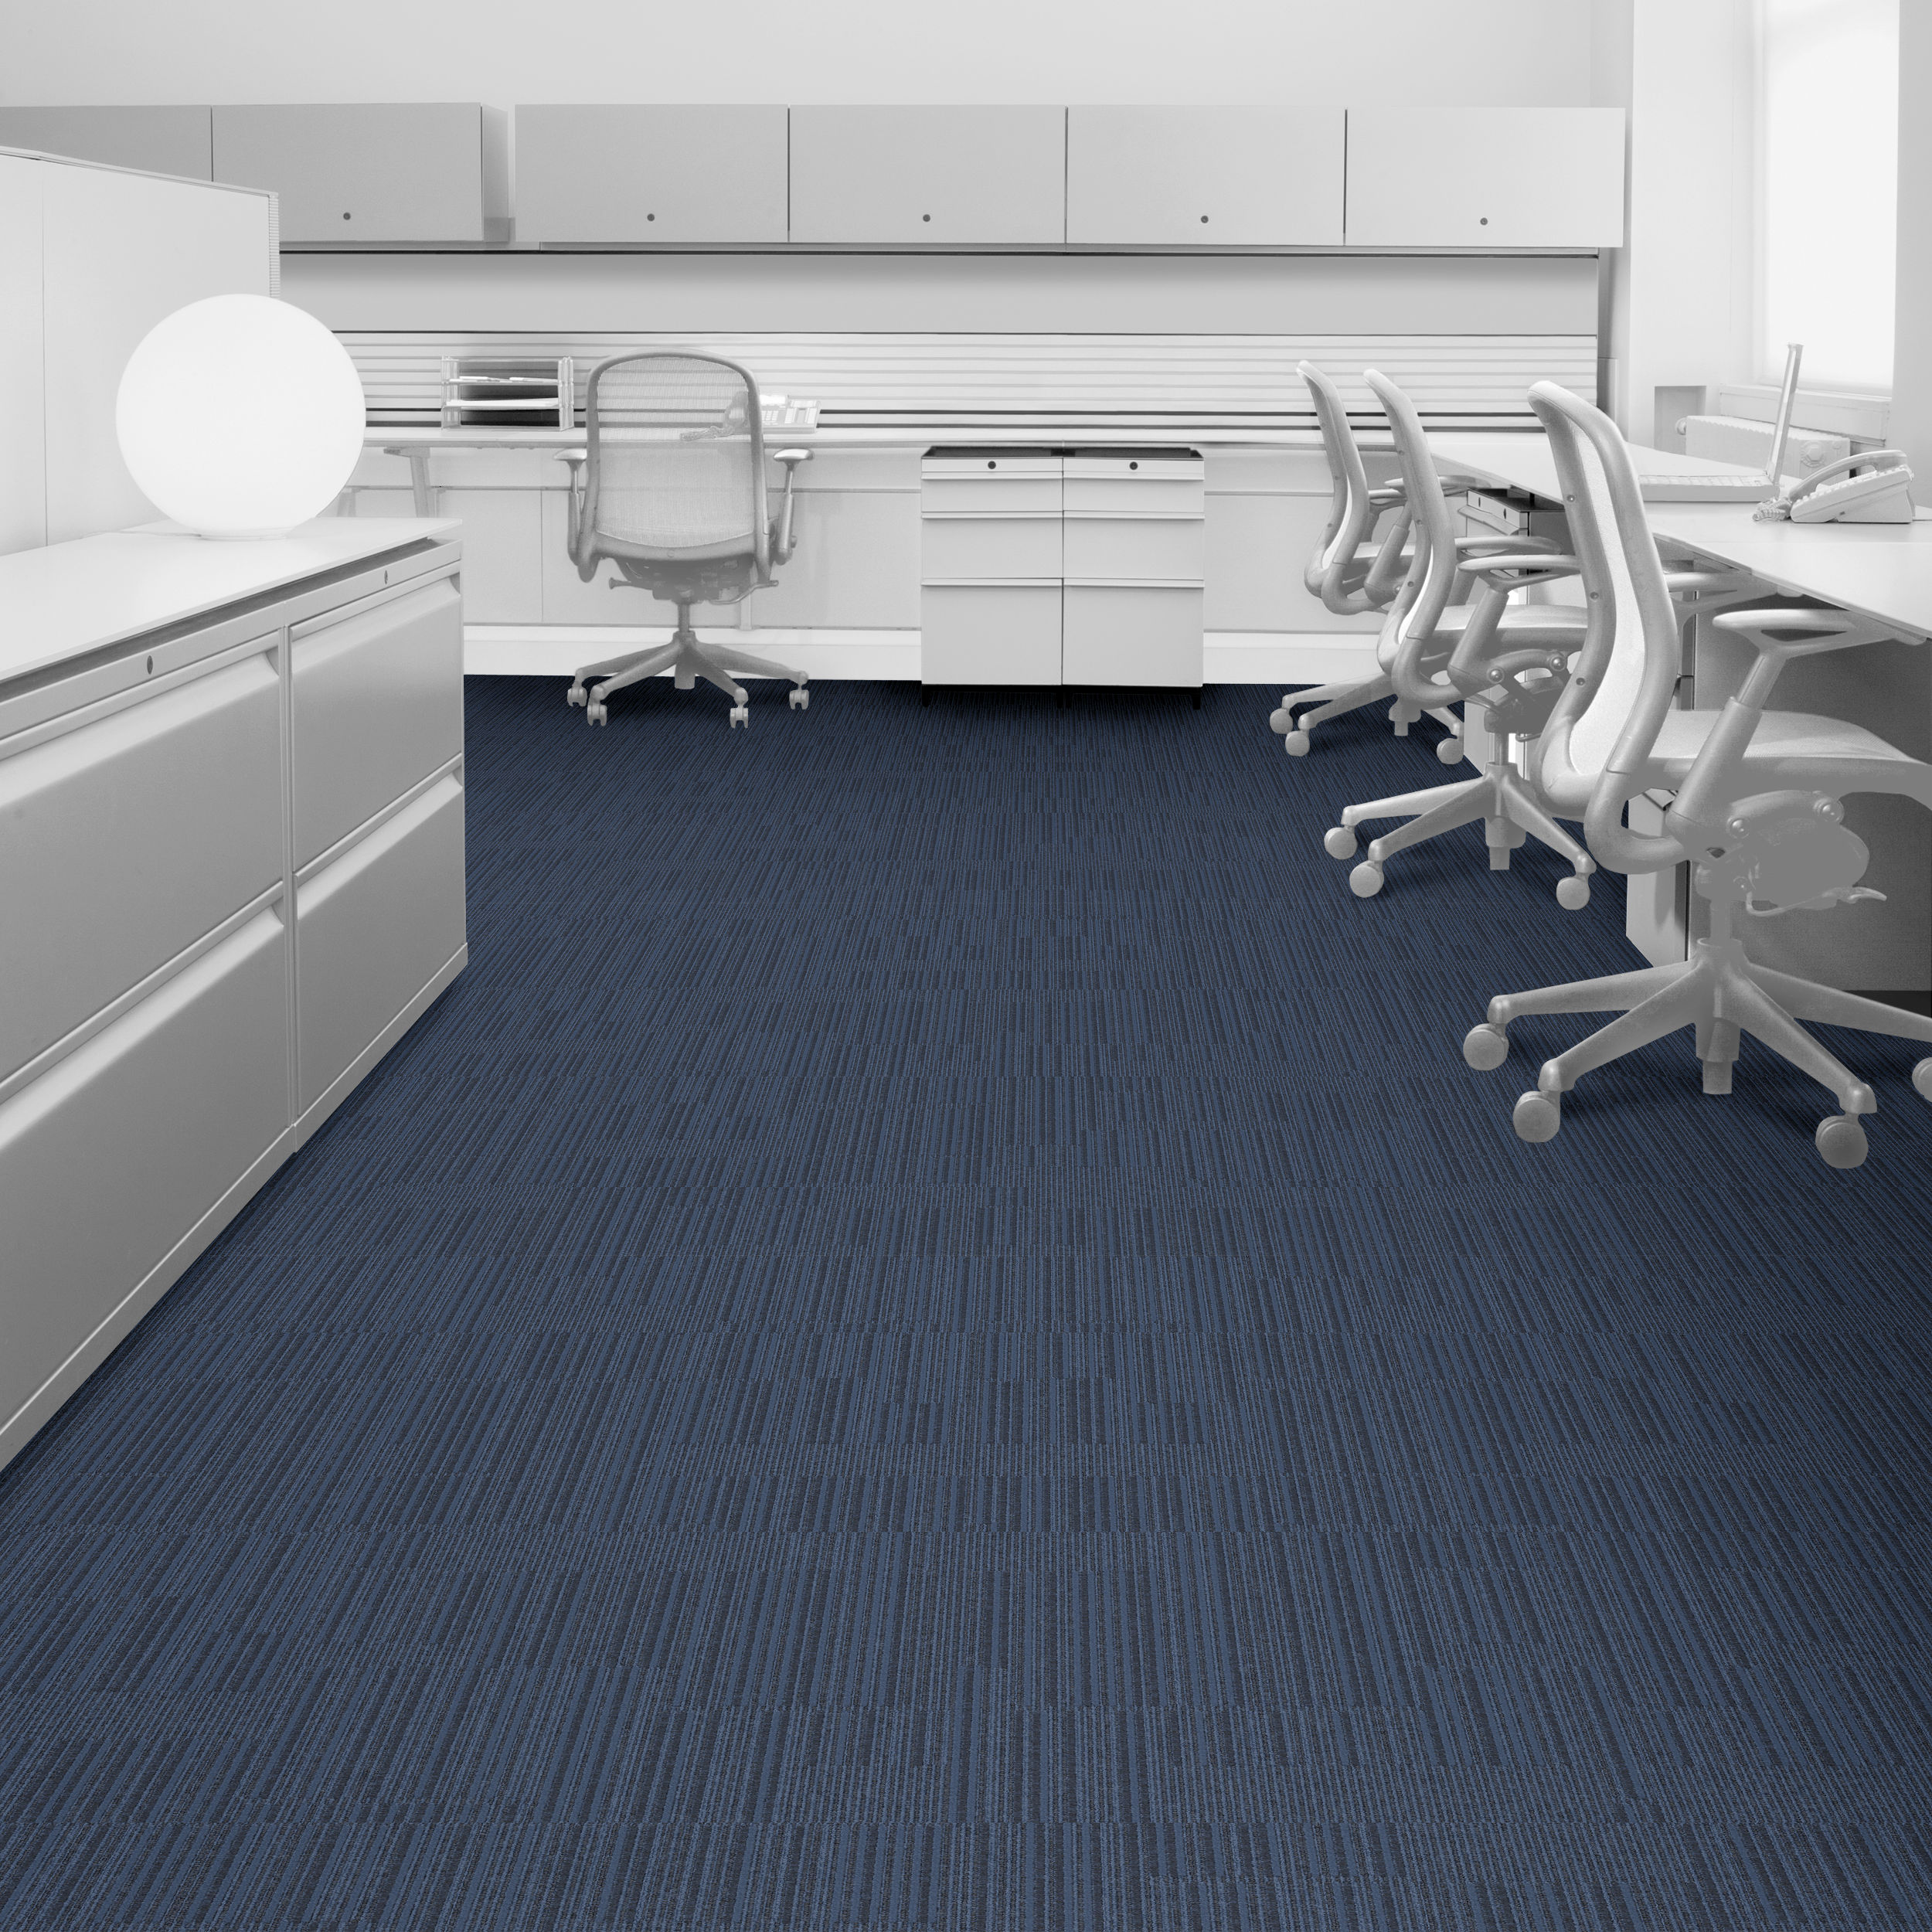 Interface Equilibrium Equailty Carpet Tile in office setting.